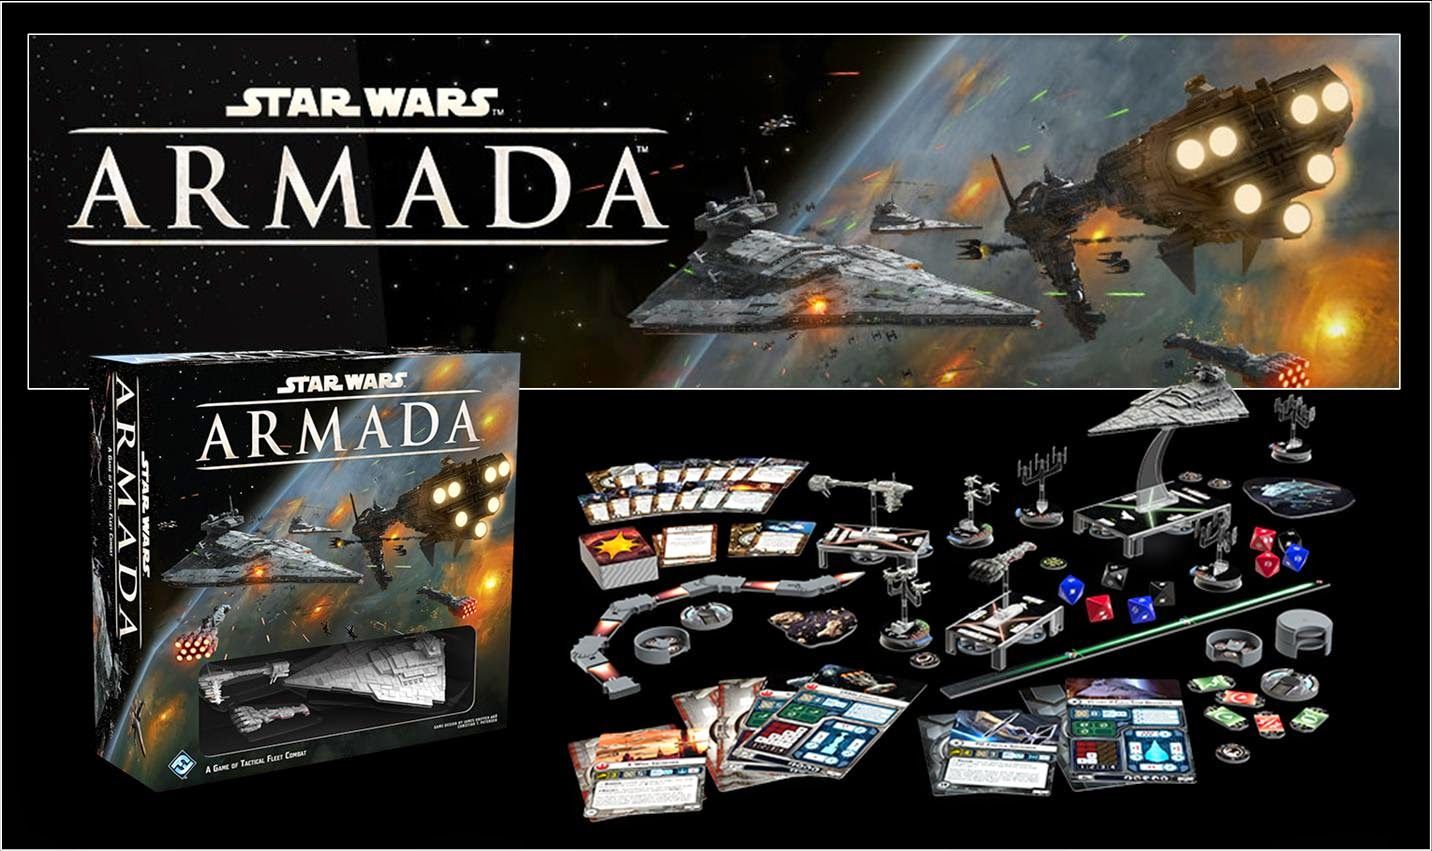 First Wave Of Expansions Have Arrived for Star Wars™: Armada